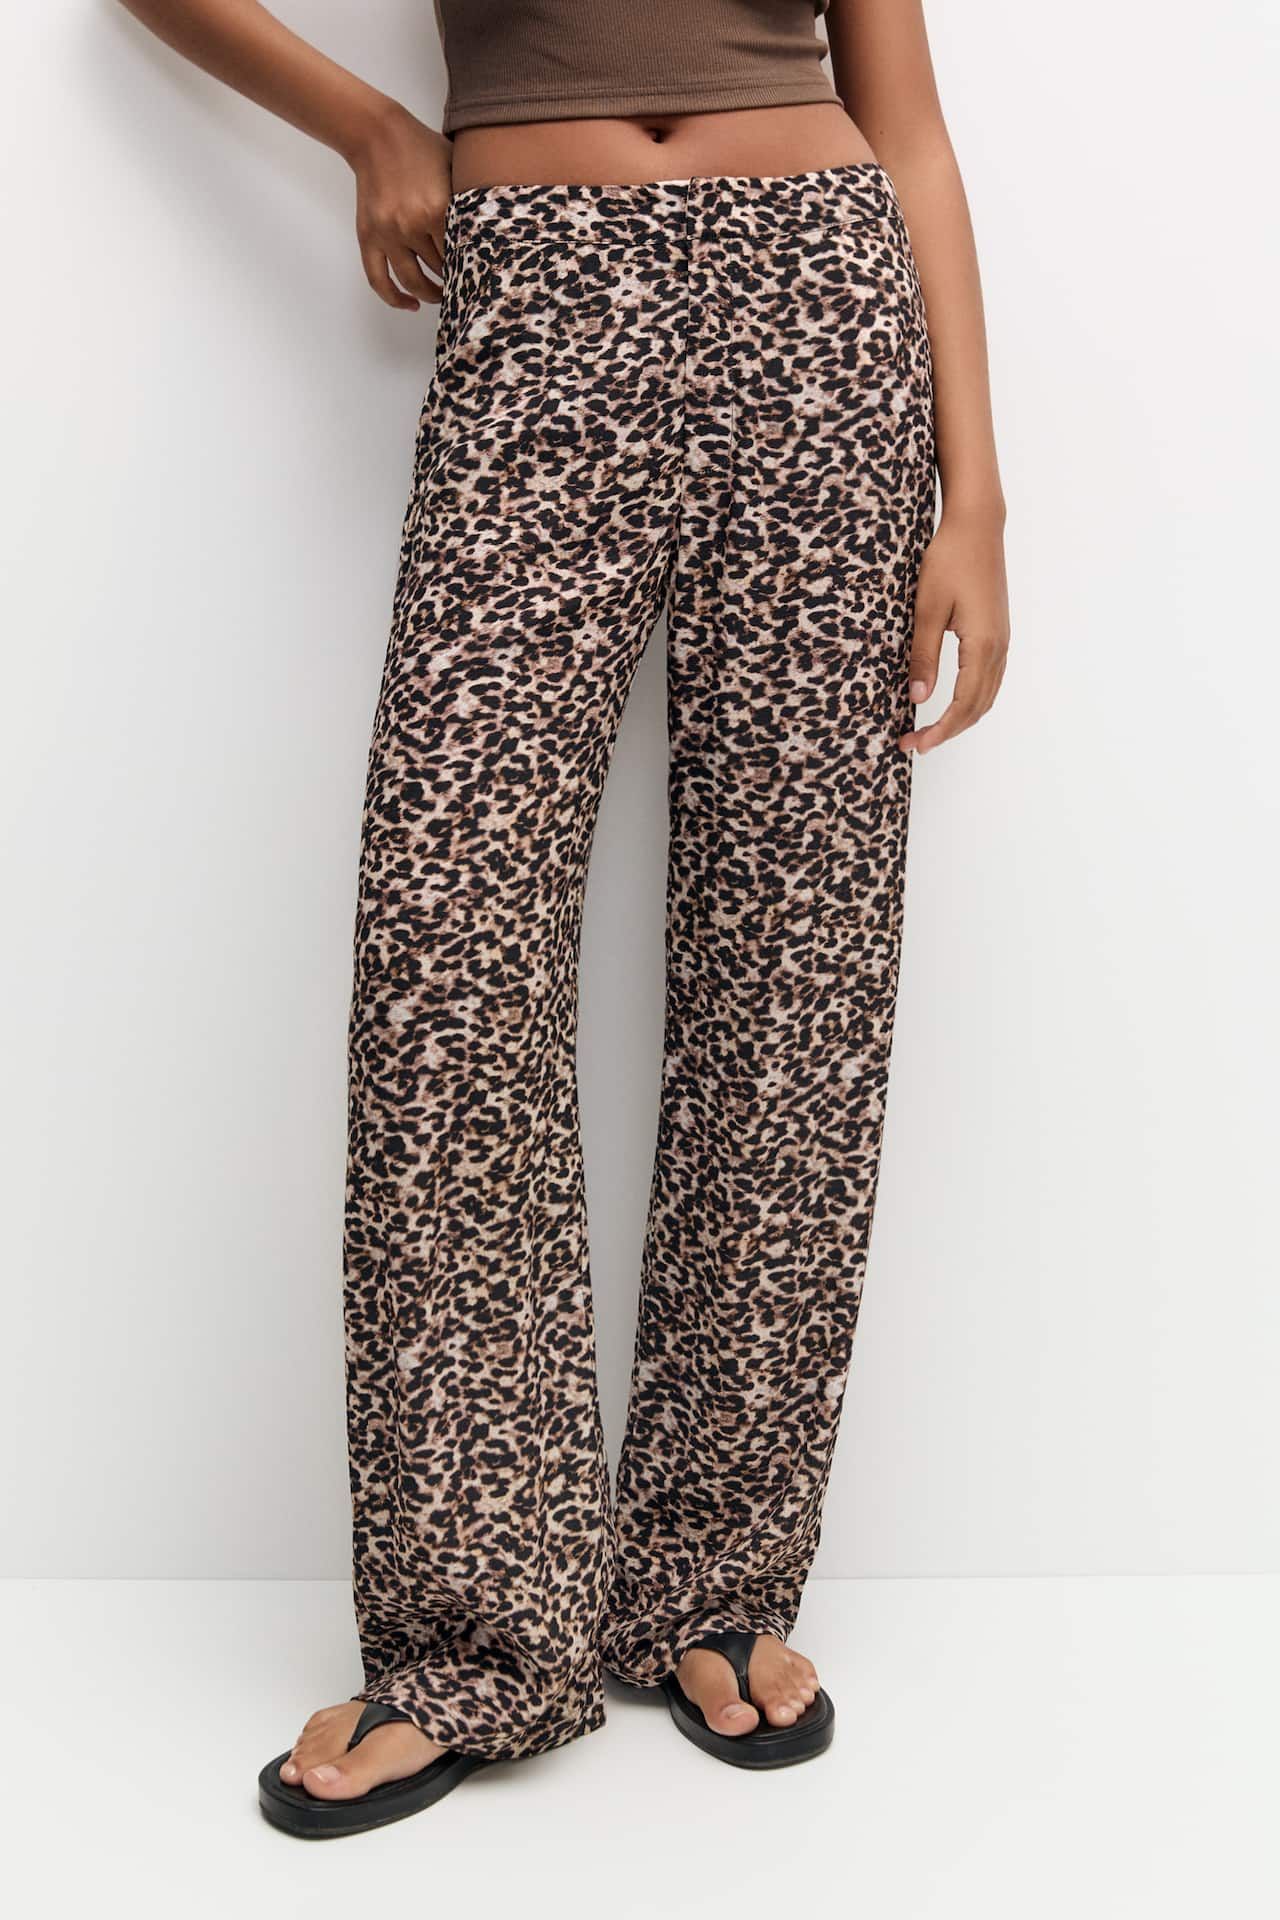 Smart leopard print trousers | PULL and BEAR UK